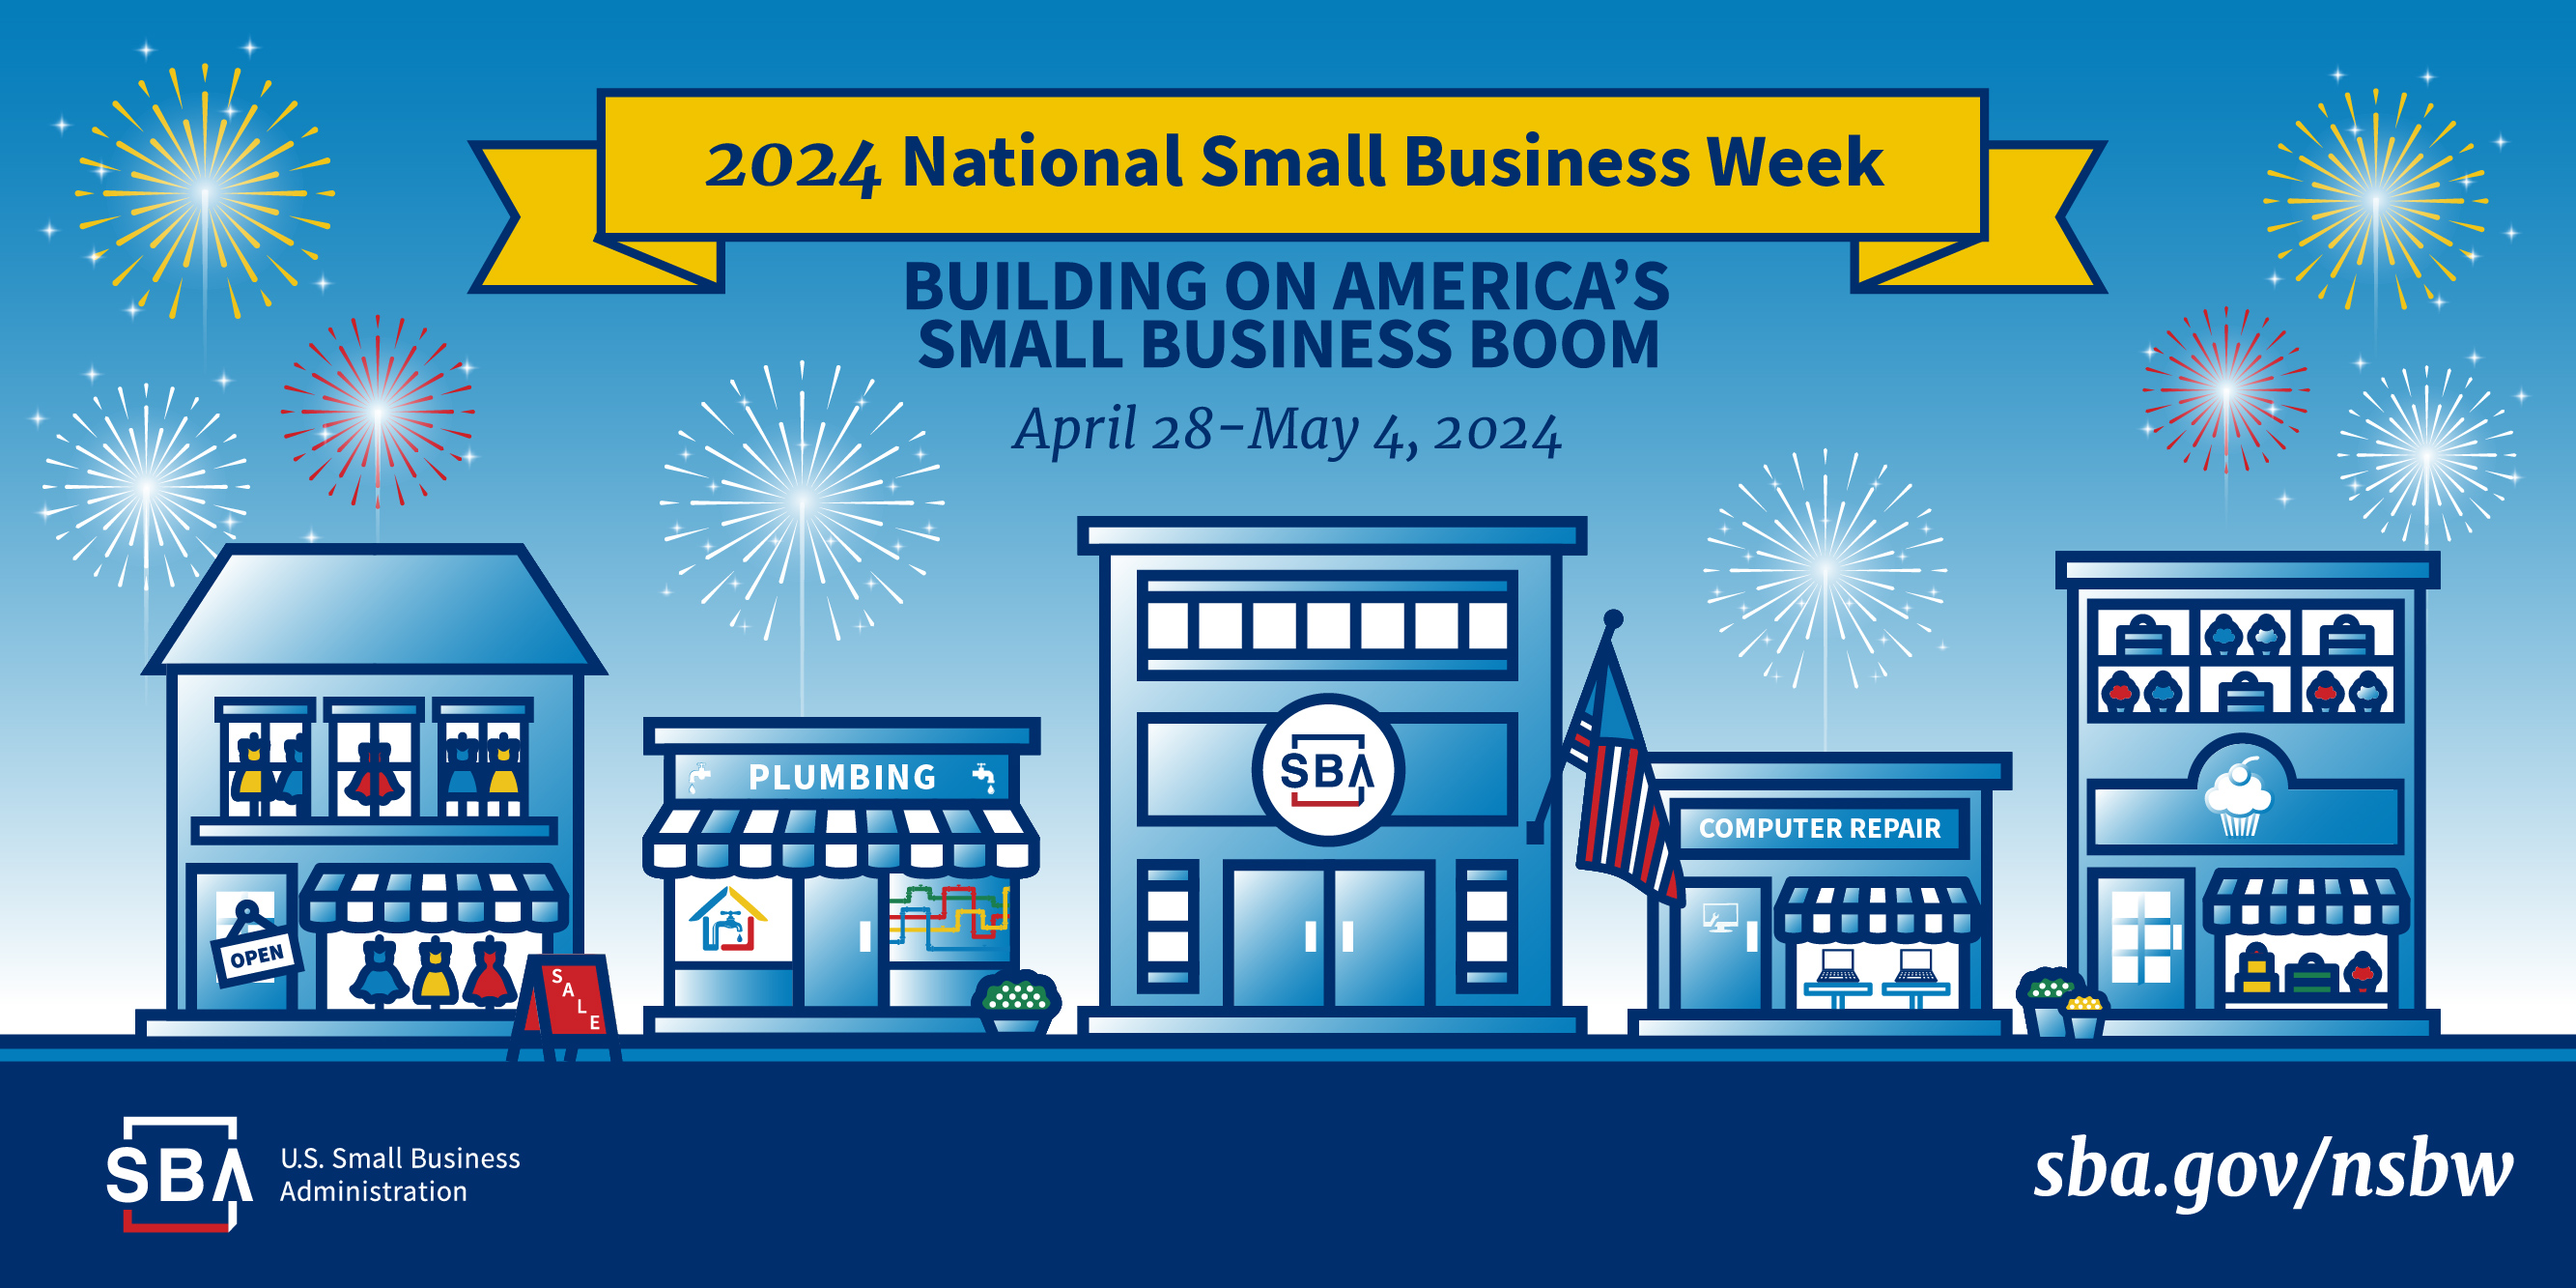 Event Promo Photo For Small Business Week